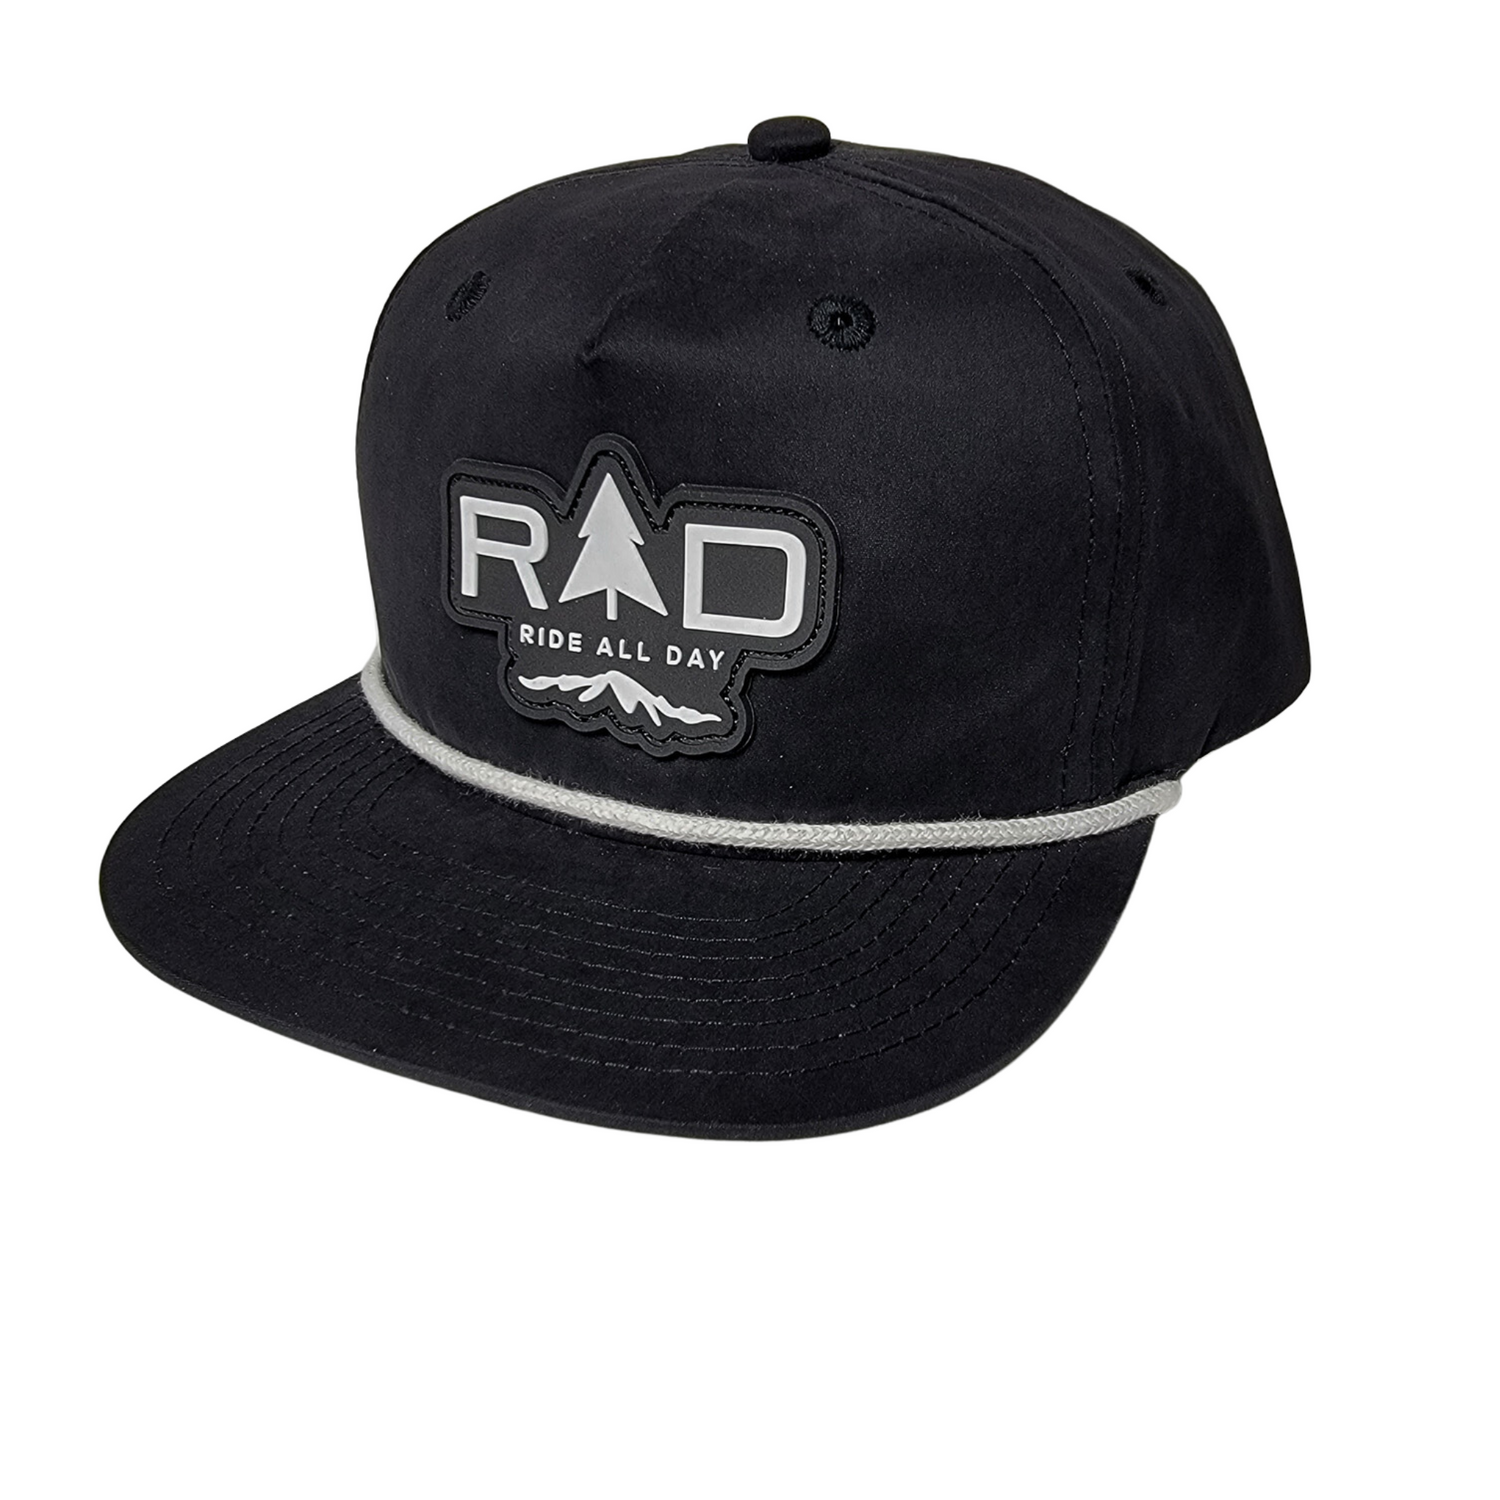 Ride All Day Apparel 5-Panel hat in black color